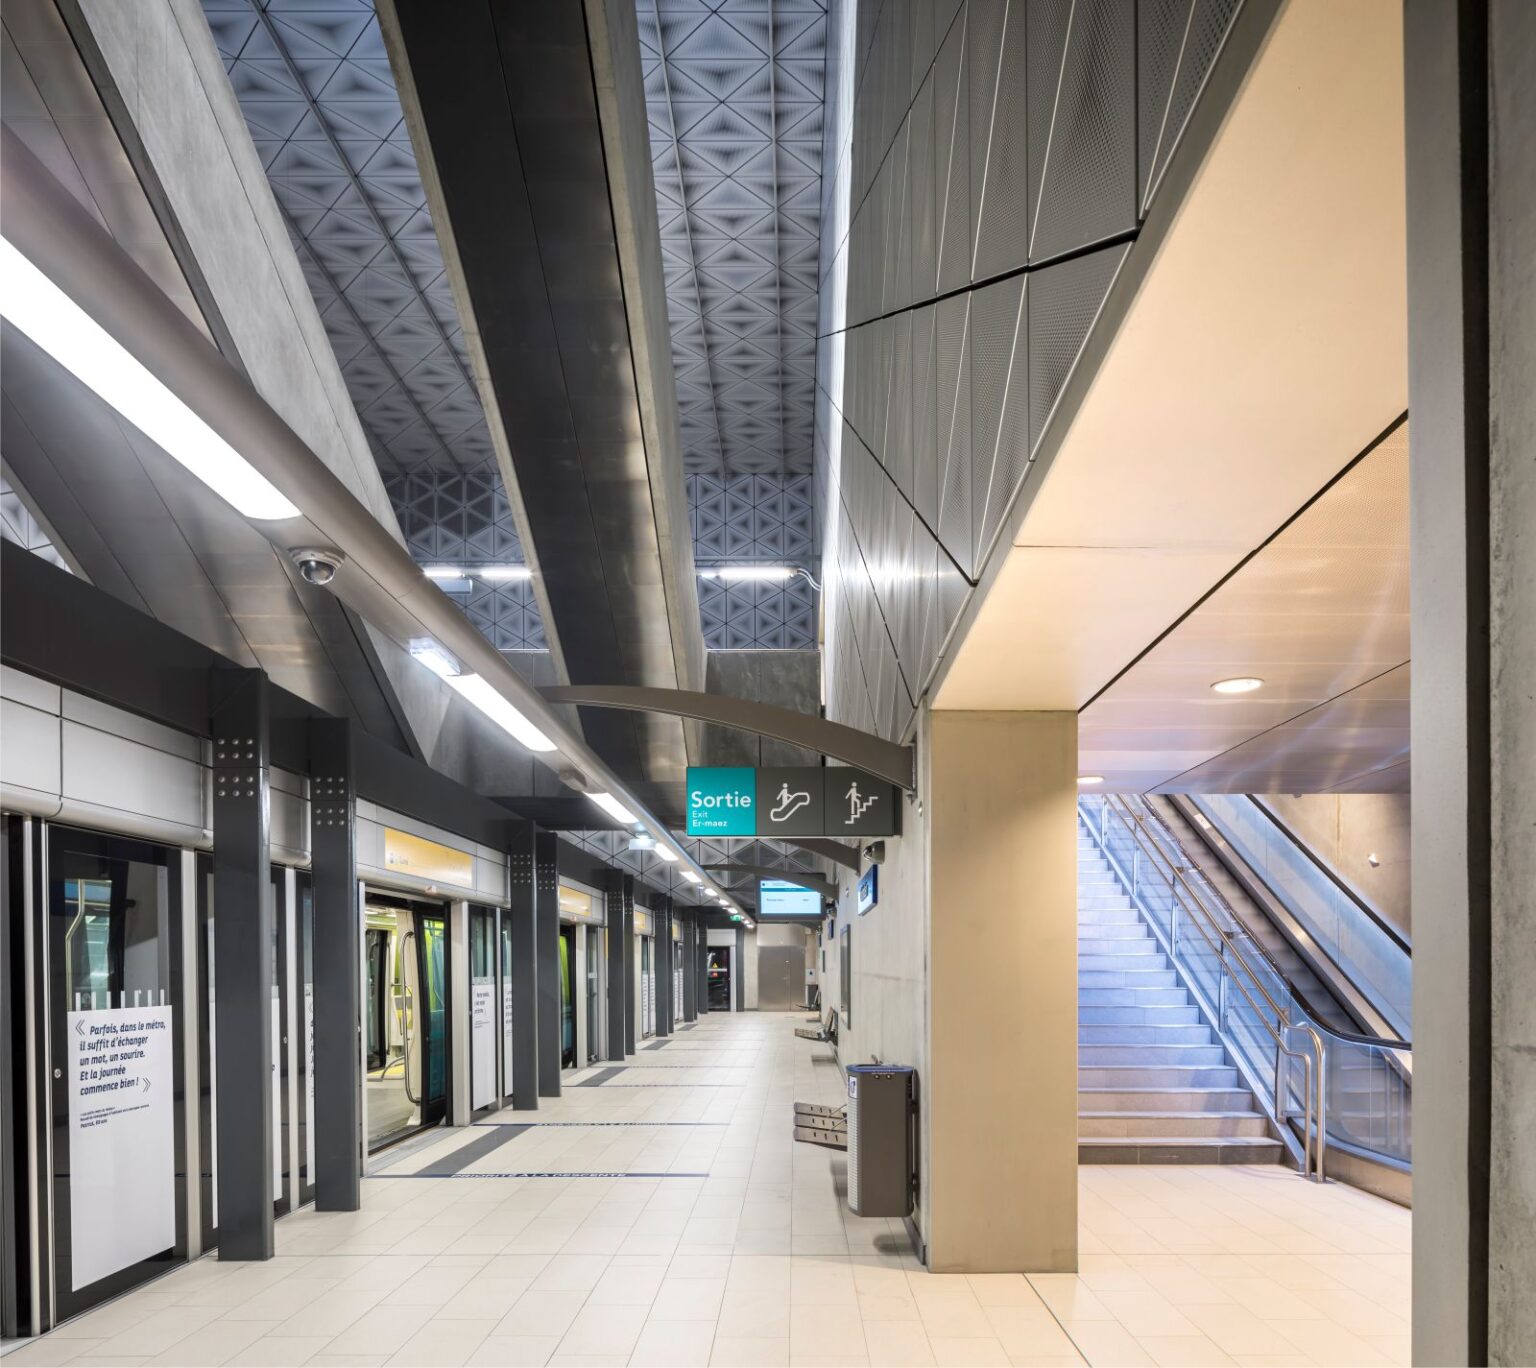 4 Metro stations by AZC architectes – aasarchitecture